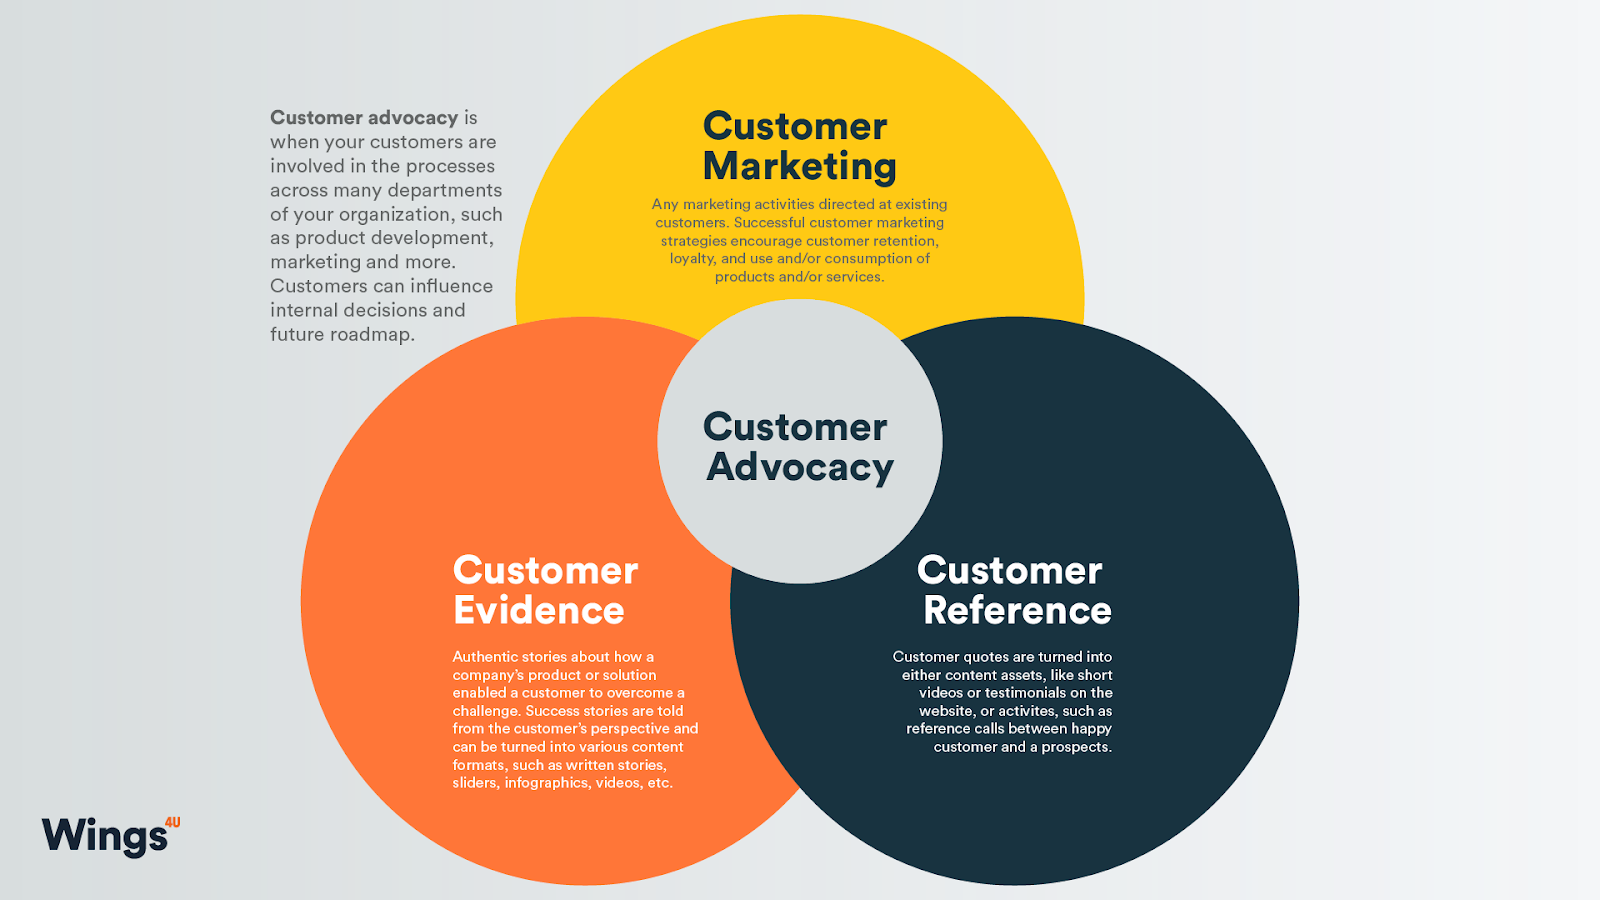 Unraveling the Key Differences: Customer Marketing, Customer Advocacy, Customer Reference, and Customer Evidence